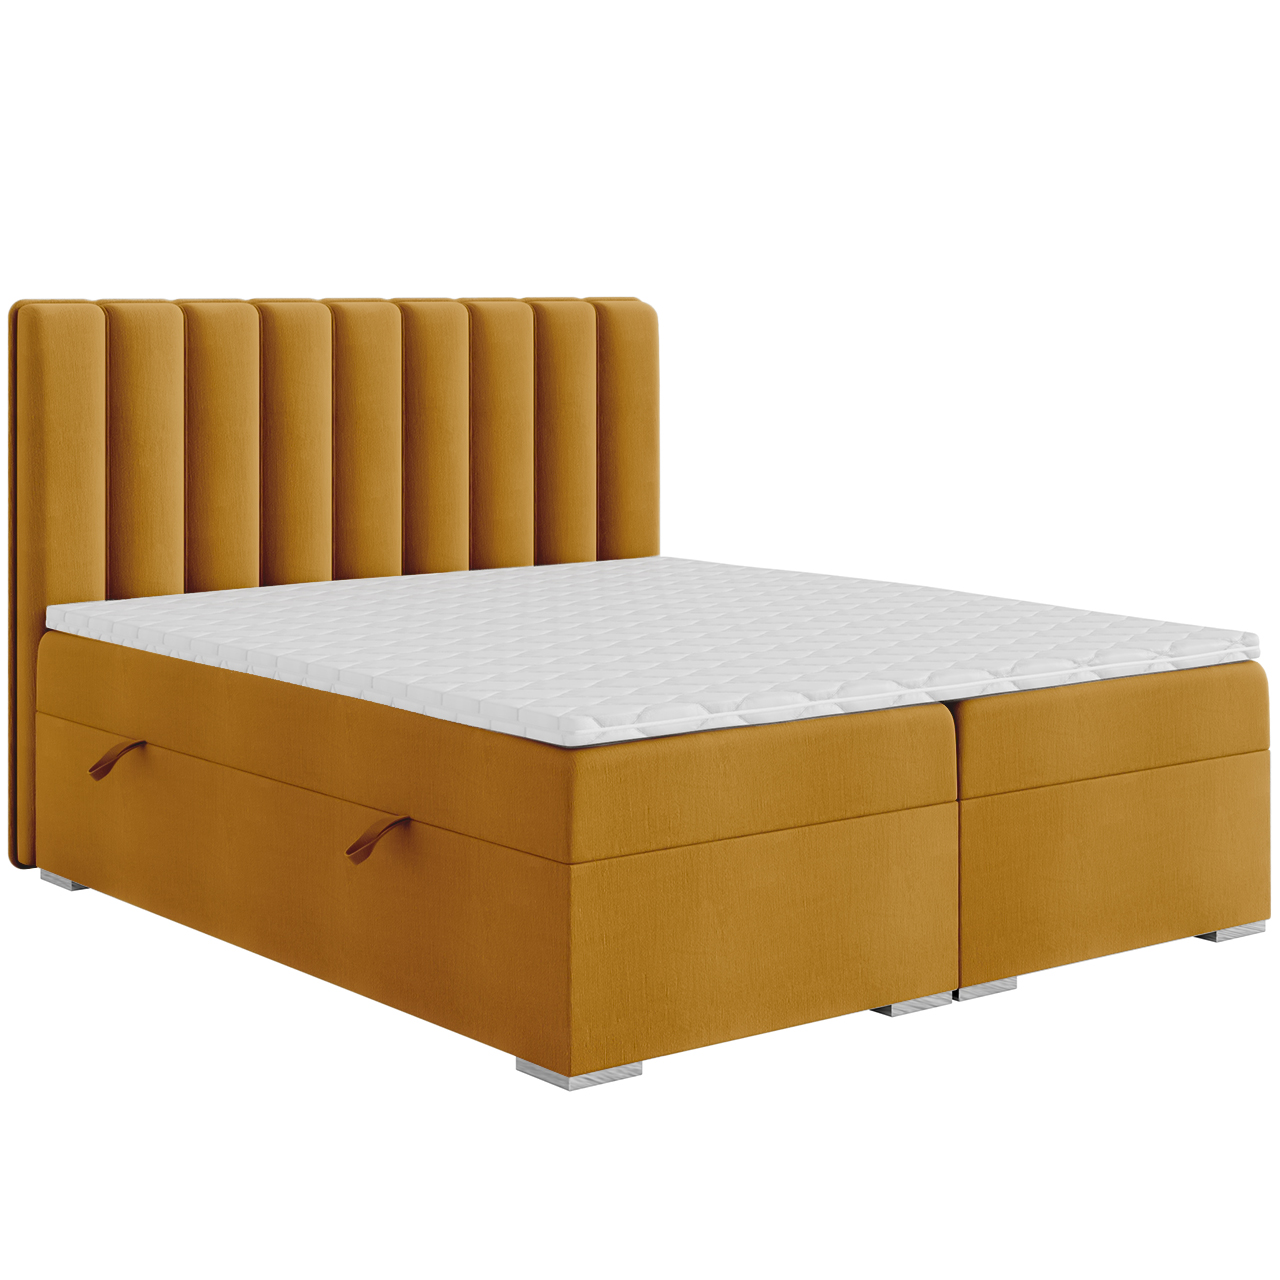 Upholstered bed FALON 140x200 riviera 41